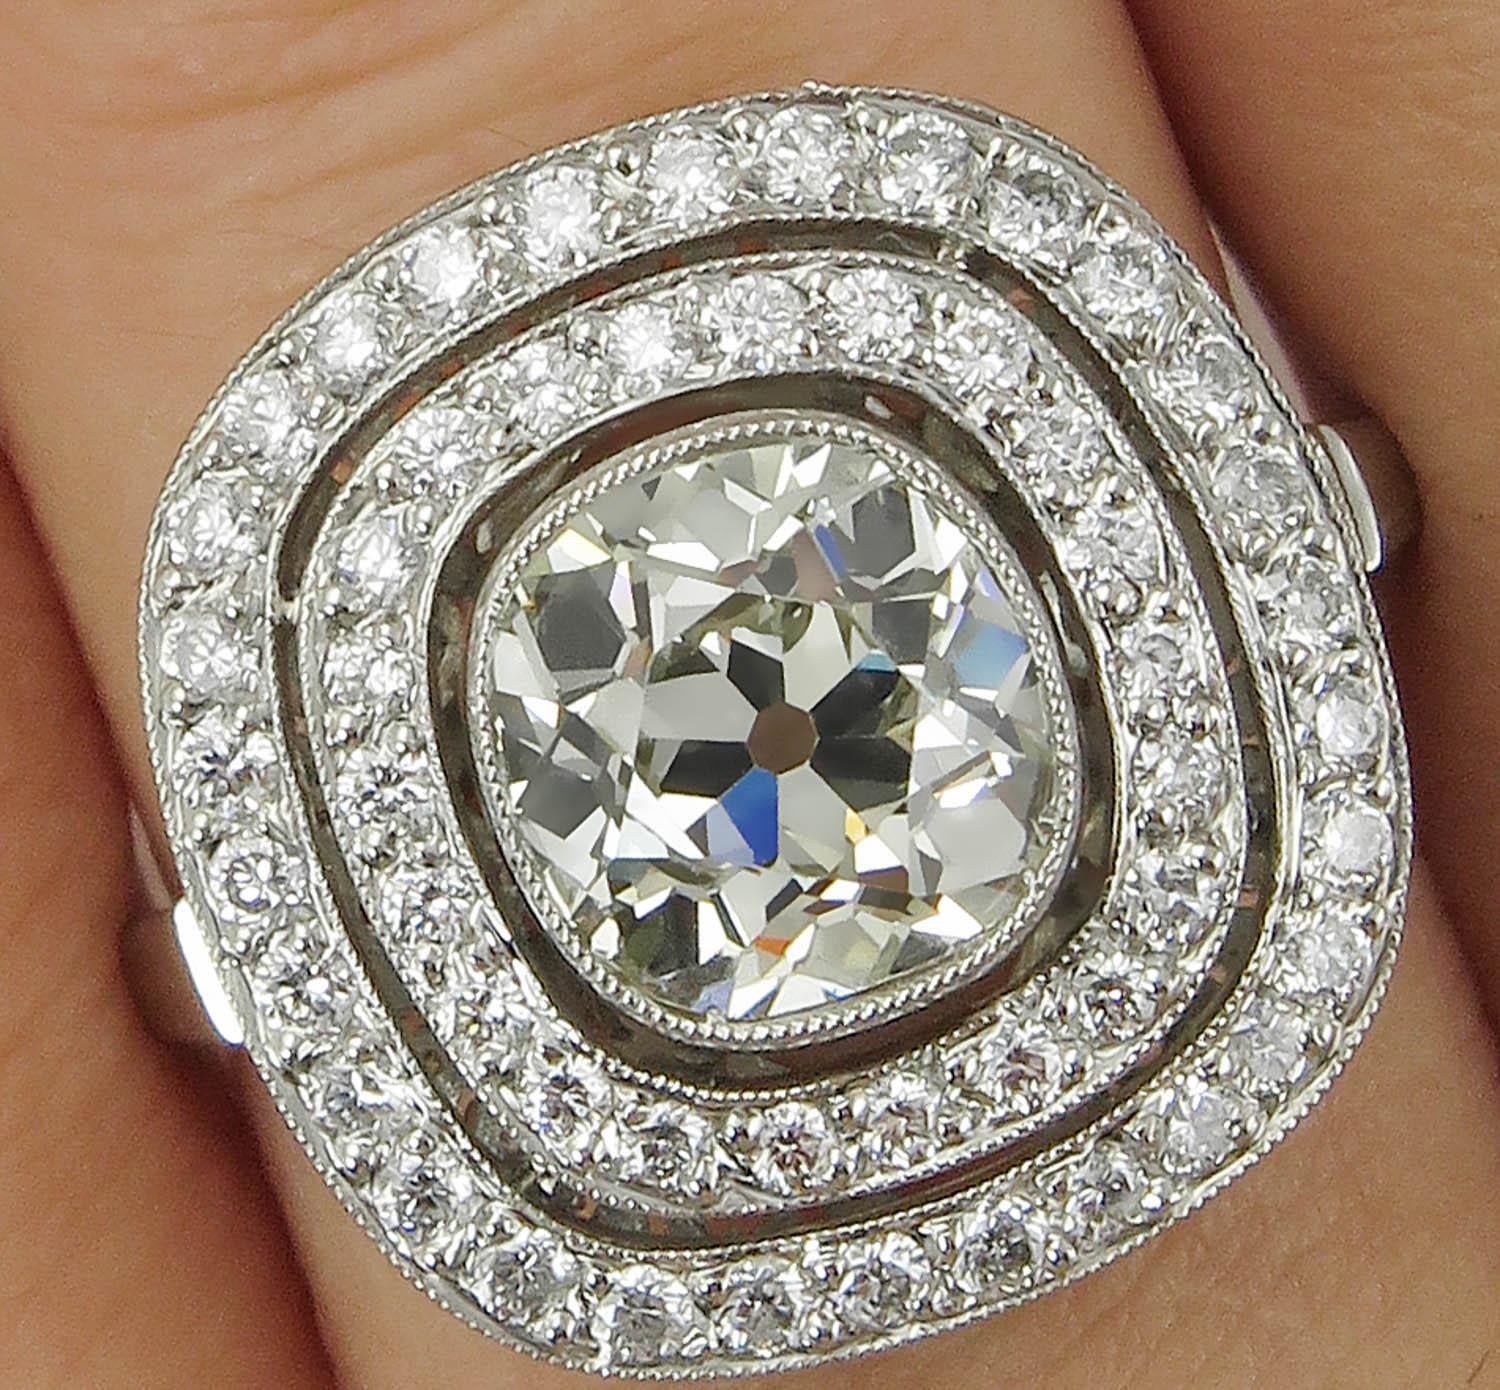 This breathtakingly beautiful and Delicate Antique Vintage Cushion shaped Platinum Ring (stamped), the Center Diamond is an OLD Mine Cut estimated 1.66CT in K-L color, SI3 clarity ( Appears Warm White and eye clear), EGL USA Certified.
It is